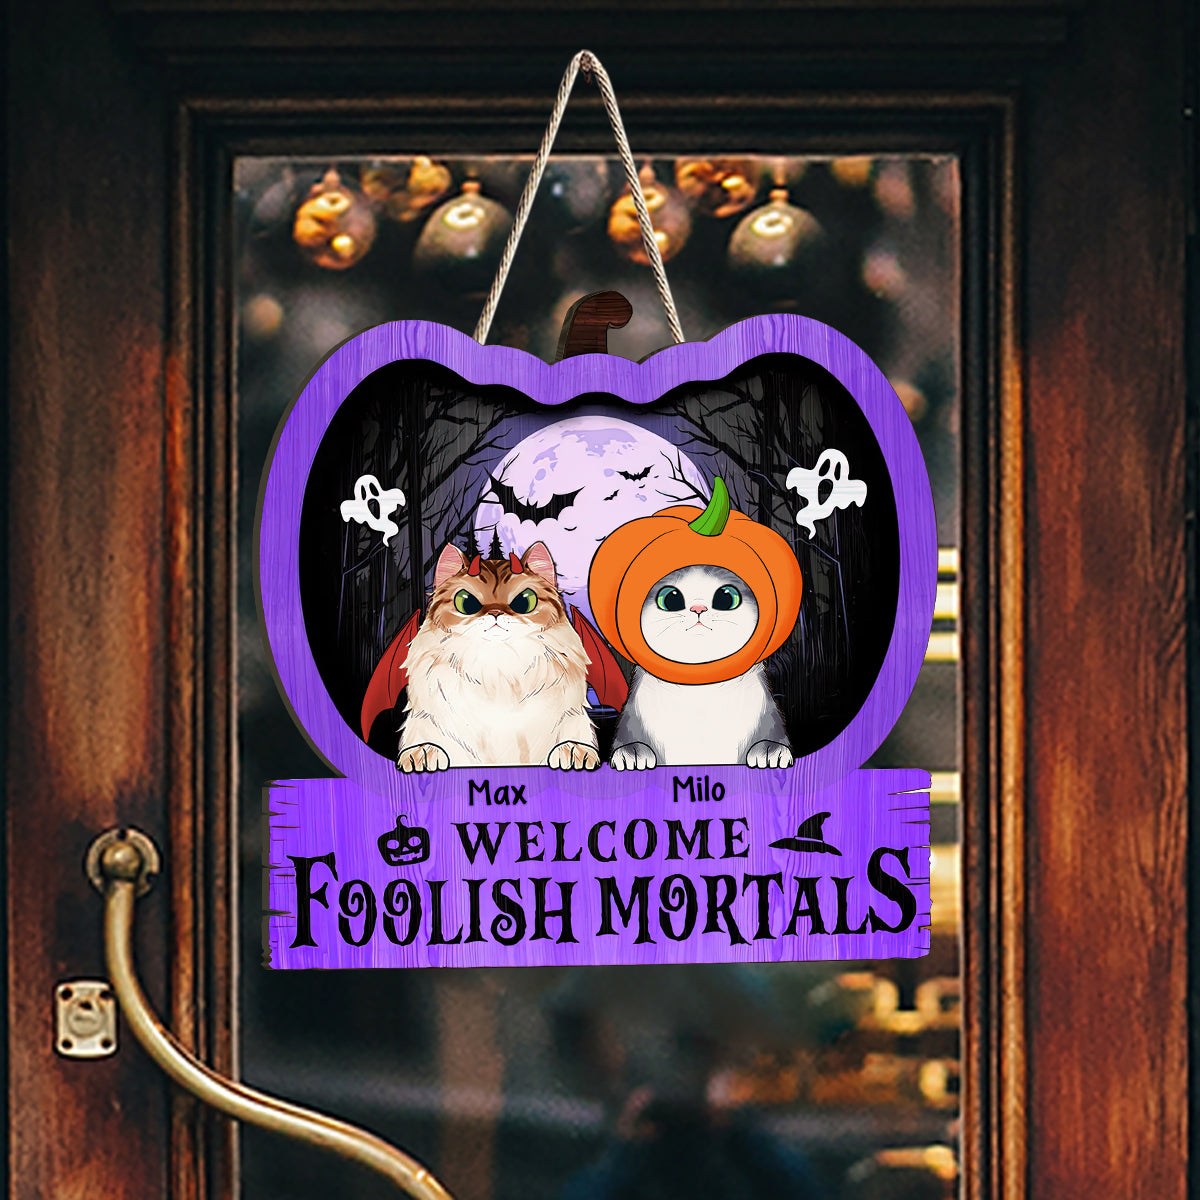 Welcome Foolish Mortal - Personalized Cat Wood Sign